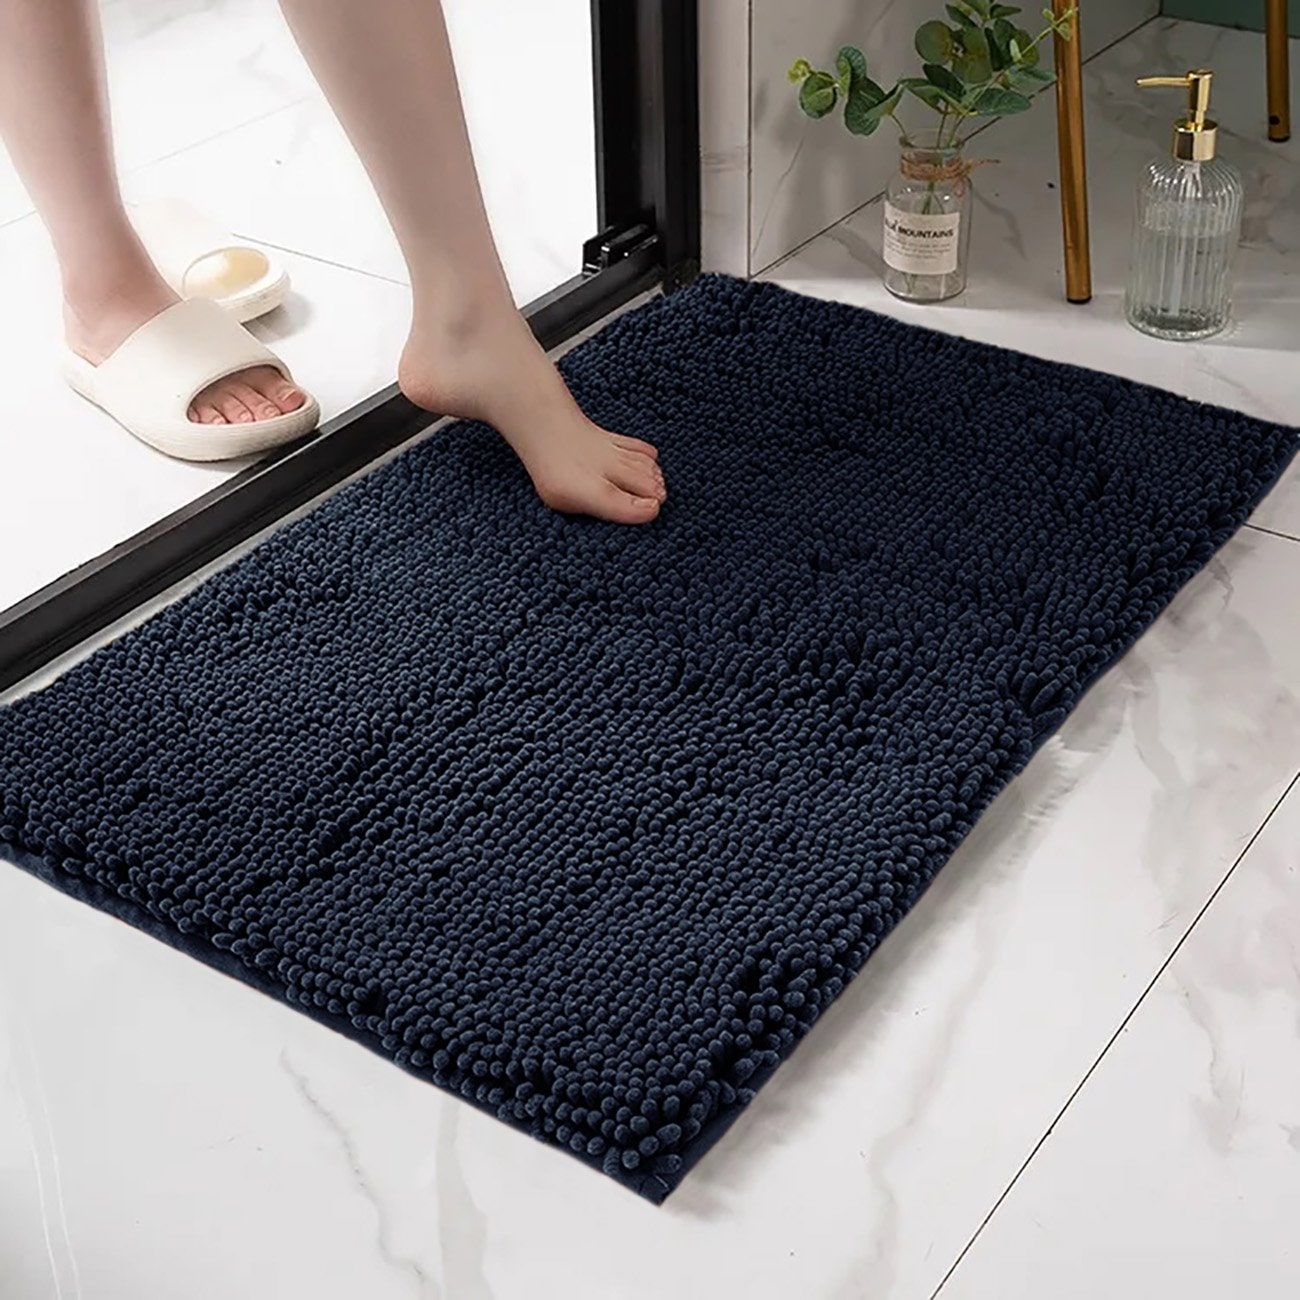 https://ak1.ostkcdn.com/images/products/is/images/direct/f1de66cf55ce8e119dc03c29a7f1c3bf30bfefab/Soft-Cozy-Plush-Chenille-Bath-Mat-Highly-Absorbent-Shower-Mat-Non-Slip-Bathroom-Rug.jpg